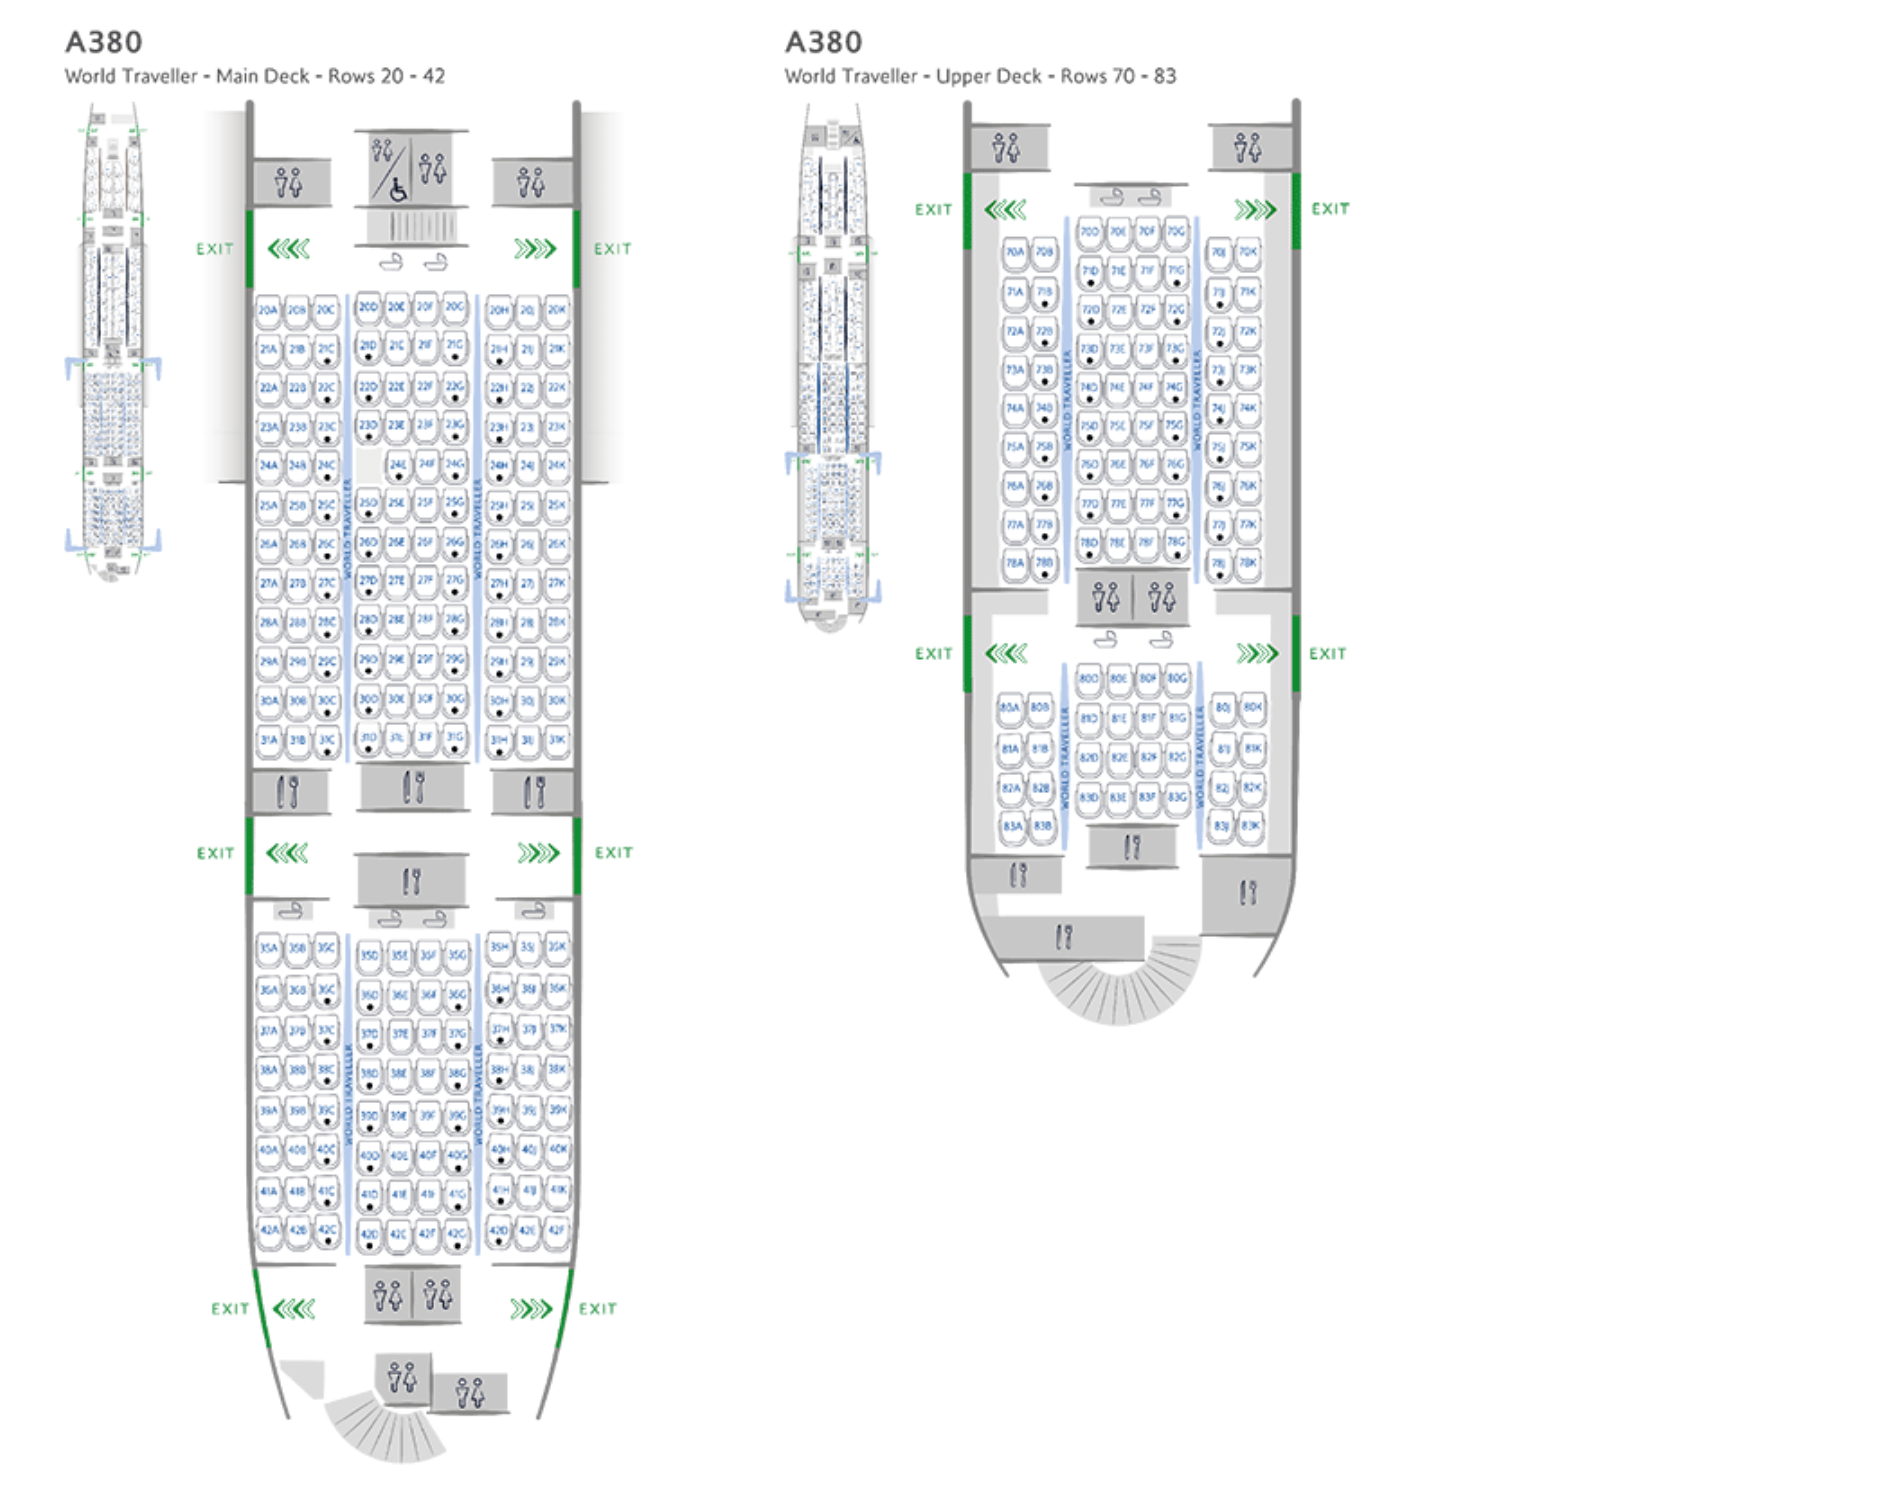 A seat map of the British Airways Airbus A380 economy class cabin.